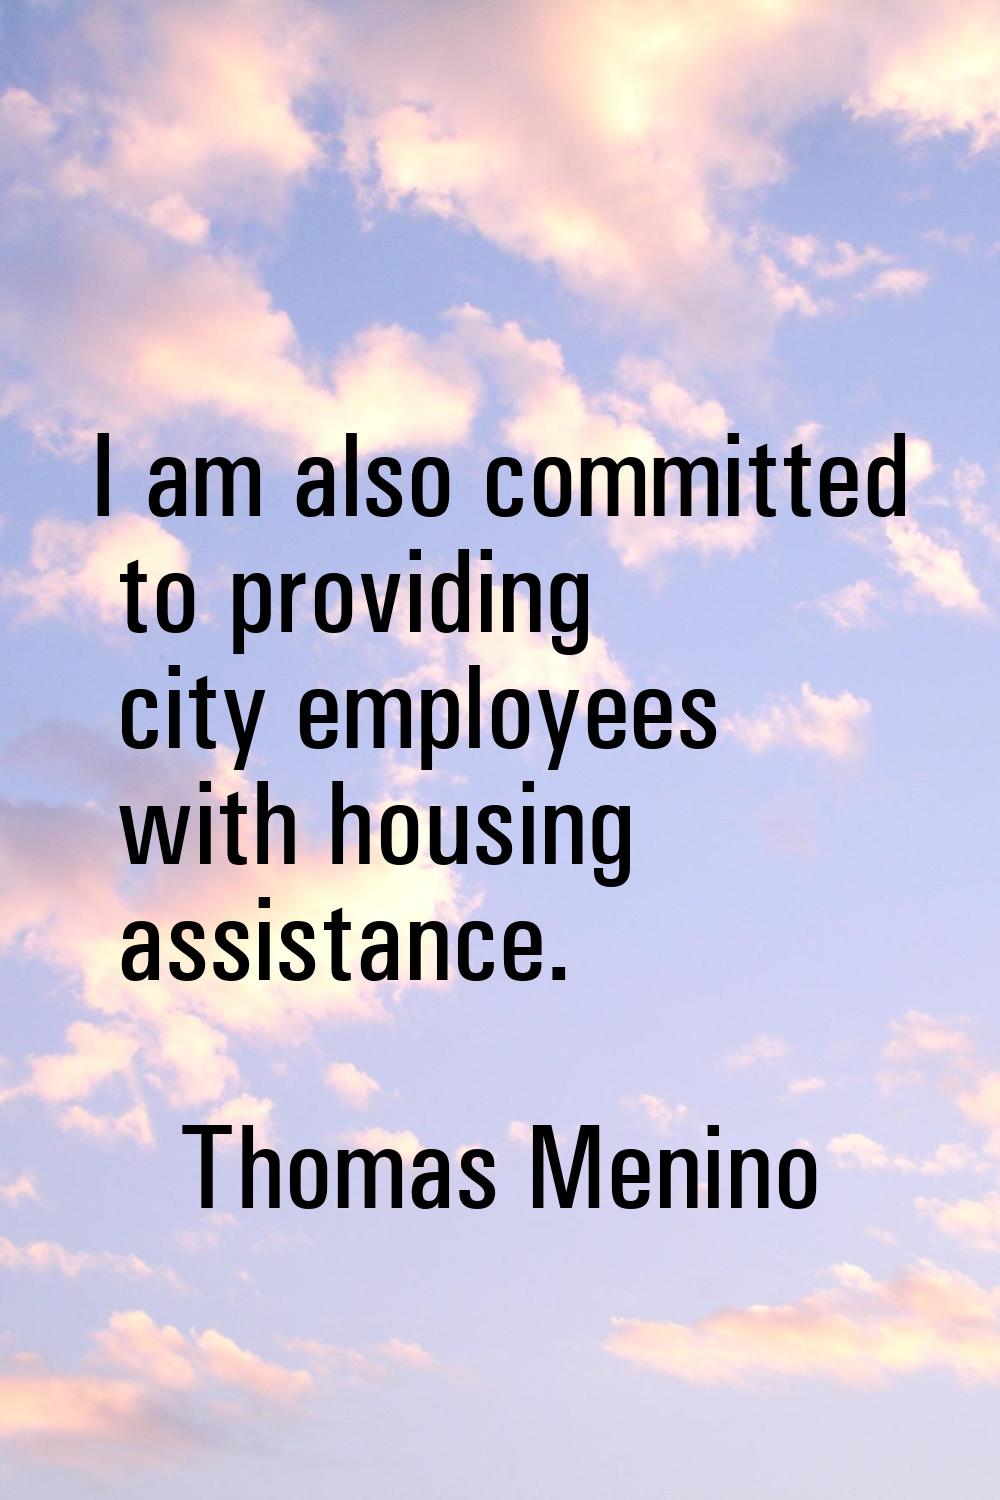 I am also committed to providing city employees with housing assistance.